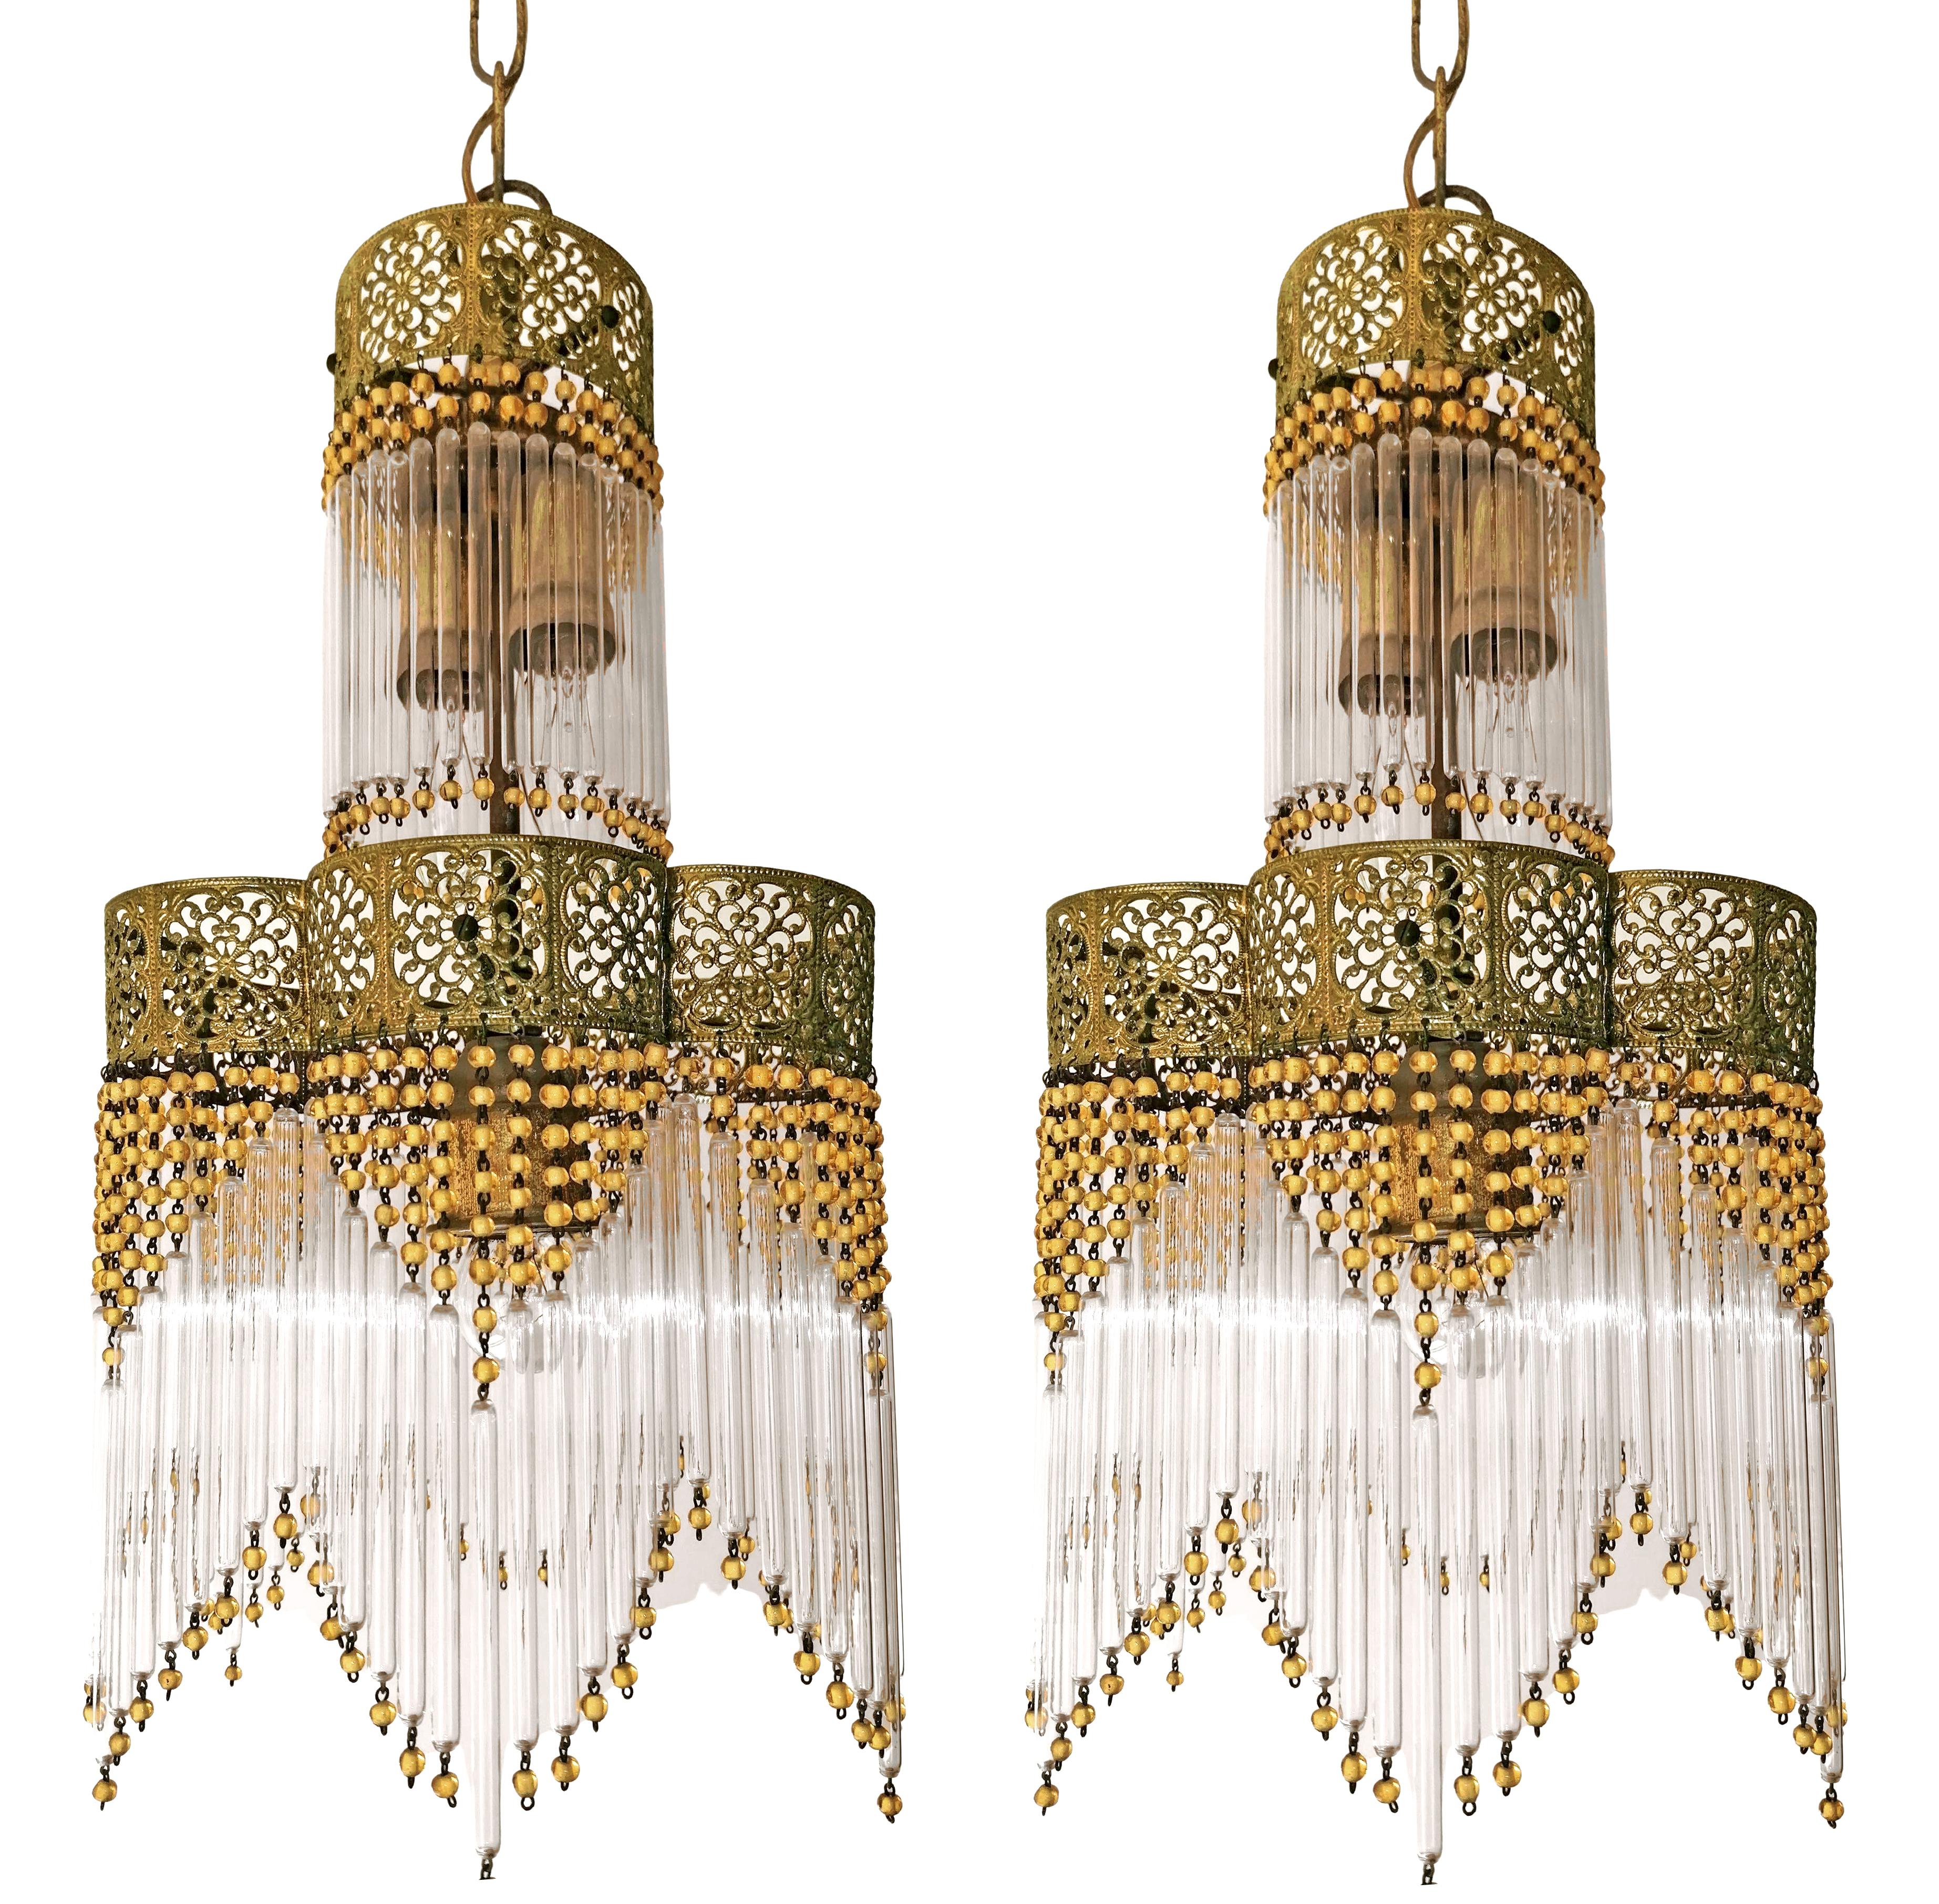 Beaded Pair of Art Deco & Art Nouveau Gilt Chandeliers with Amber Beads & Glass Fringe